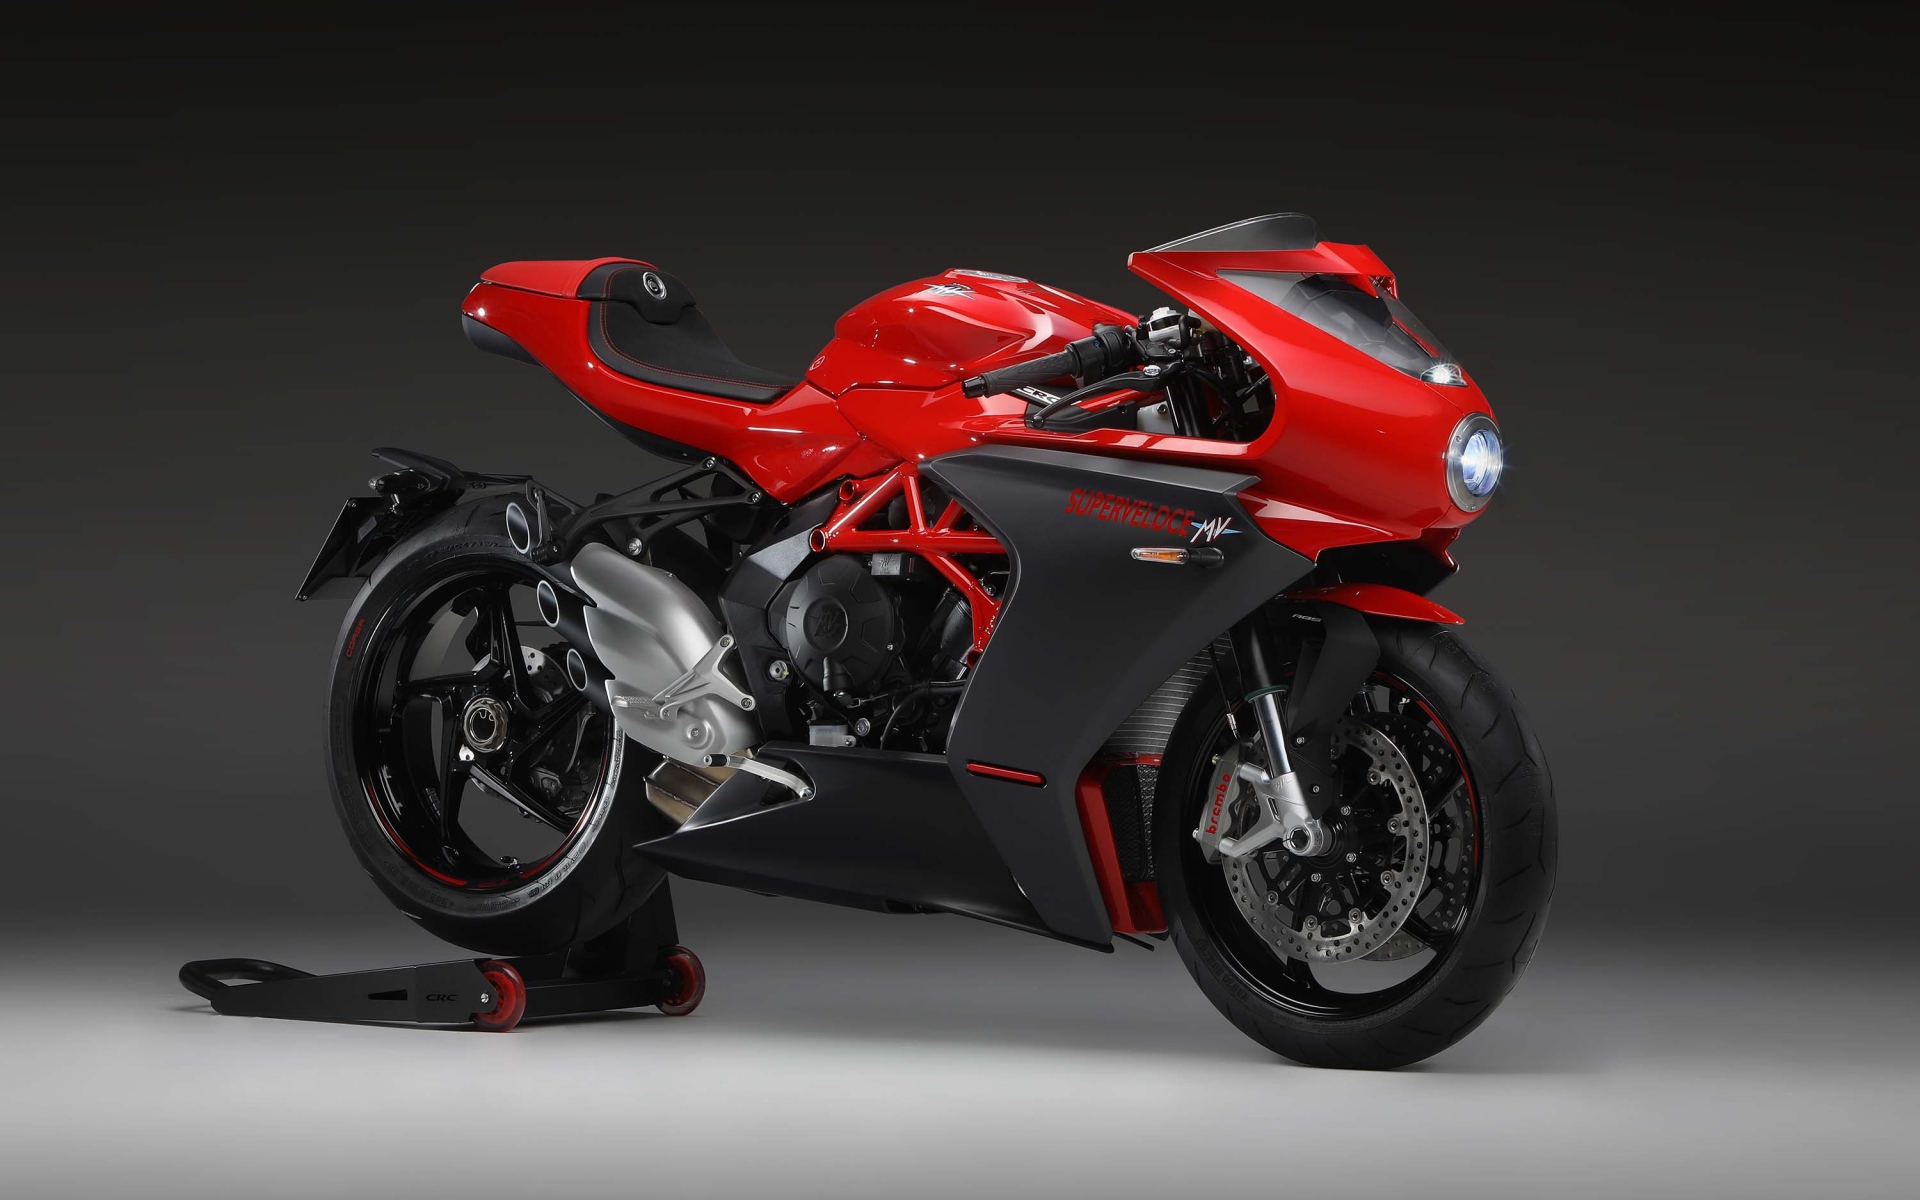 Red Agusta Superveloce 800 2020 motorcycle on a gray background